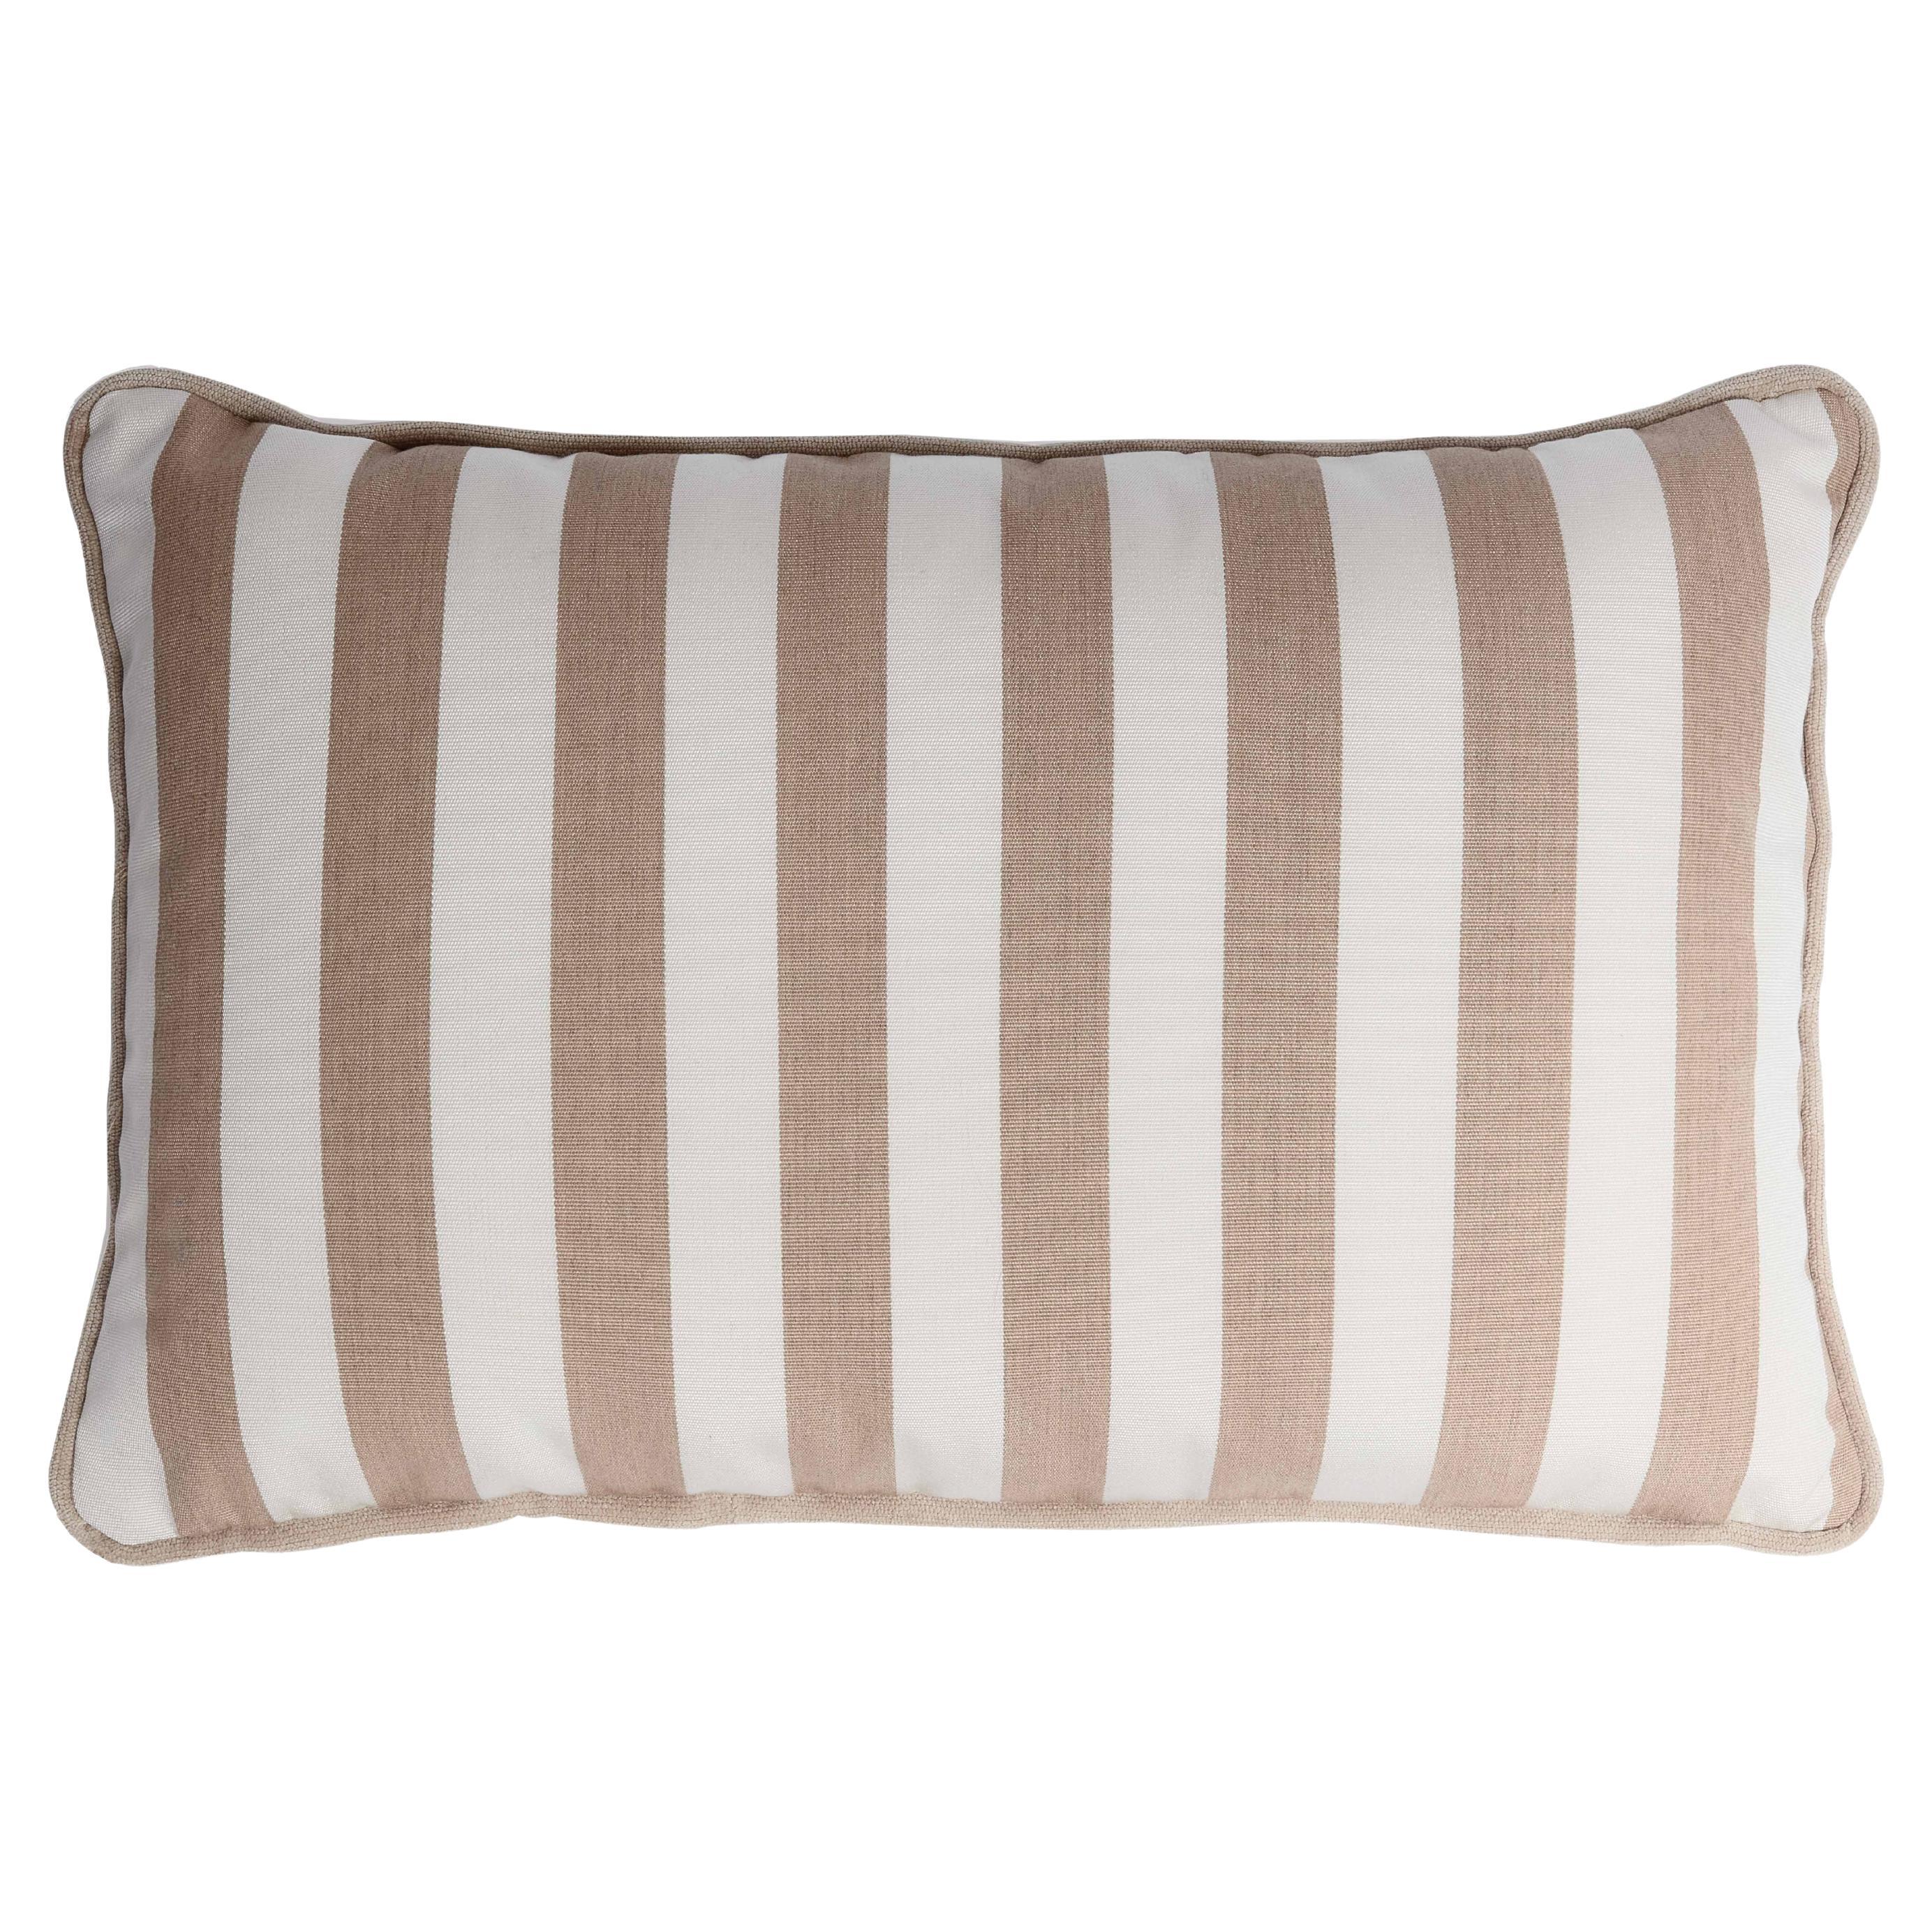 Striped Happy Pillow Outdoor with Piping Beige and White For Sale